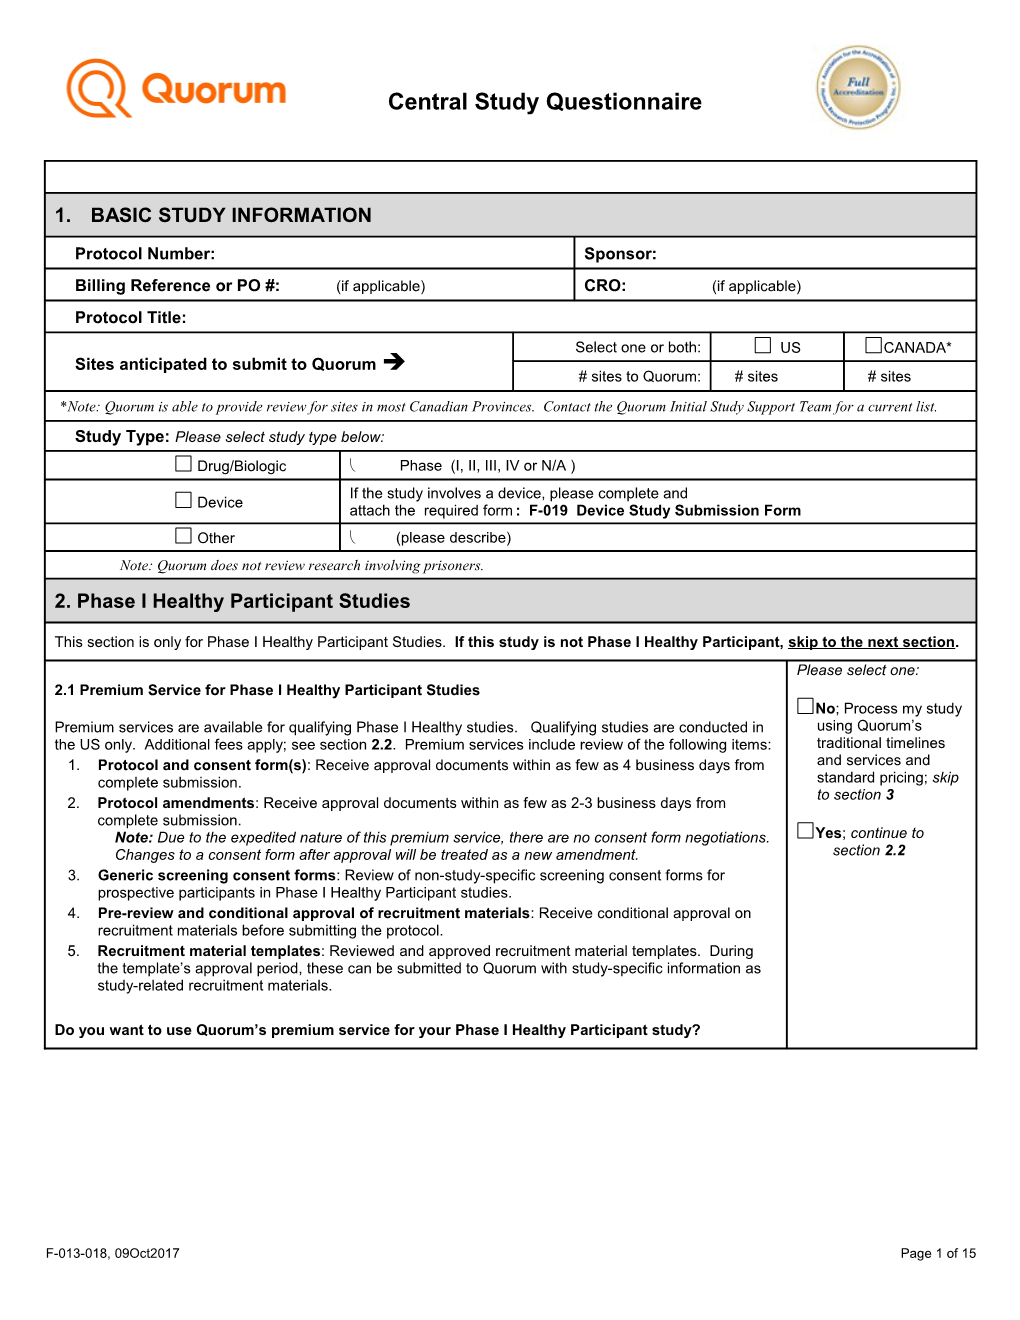 Signature and Title of Person Completing Form Date